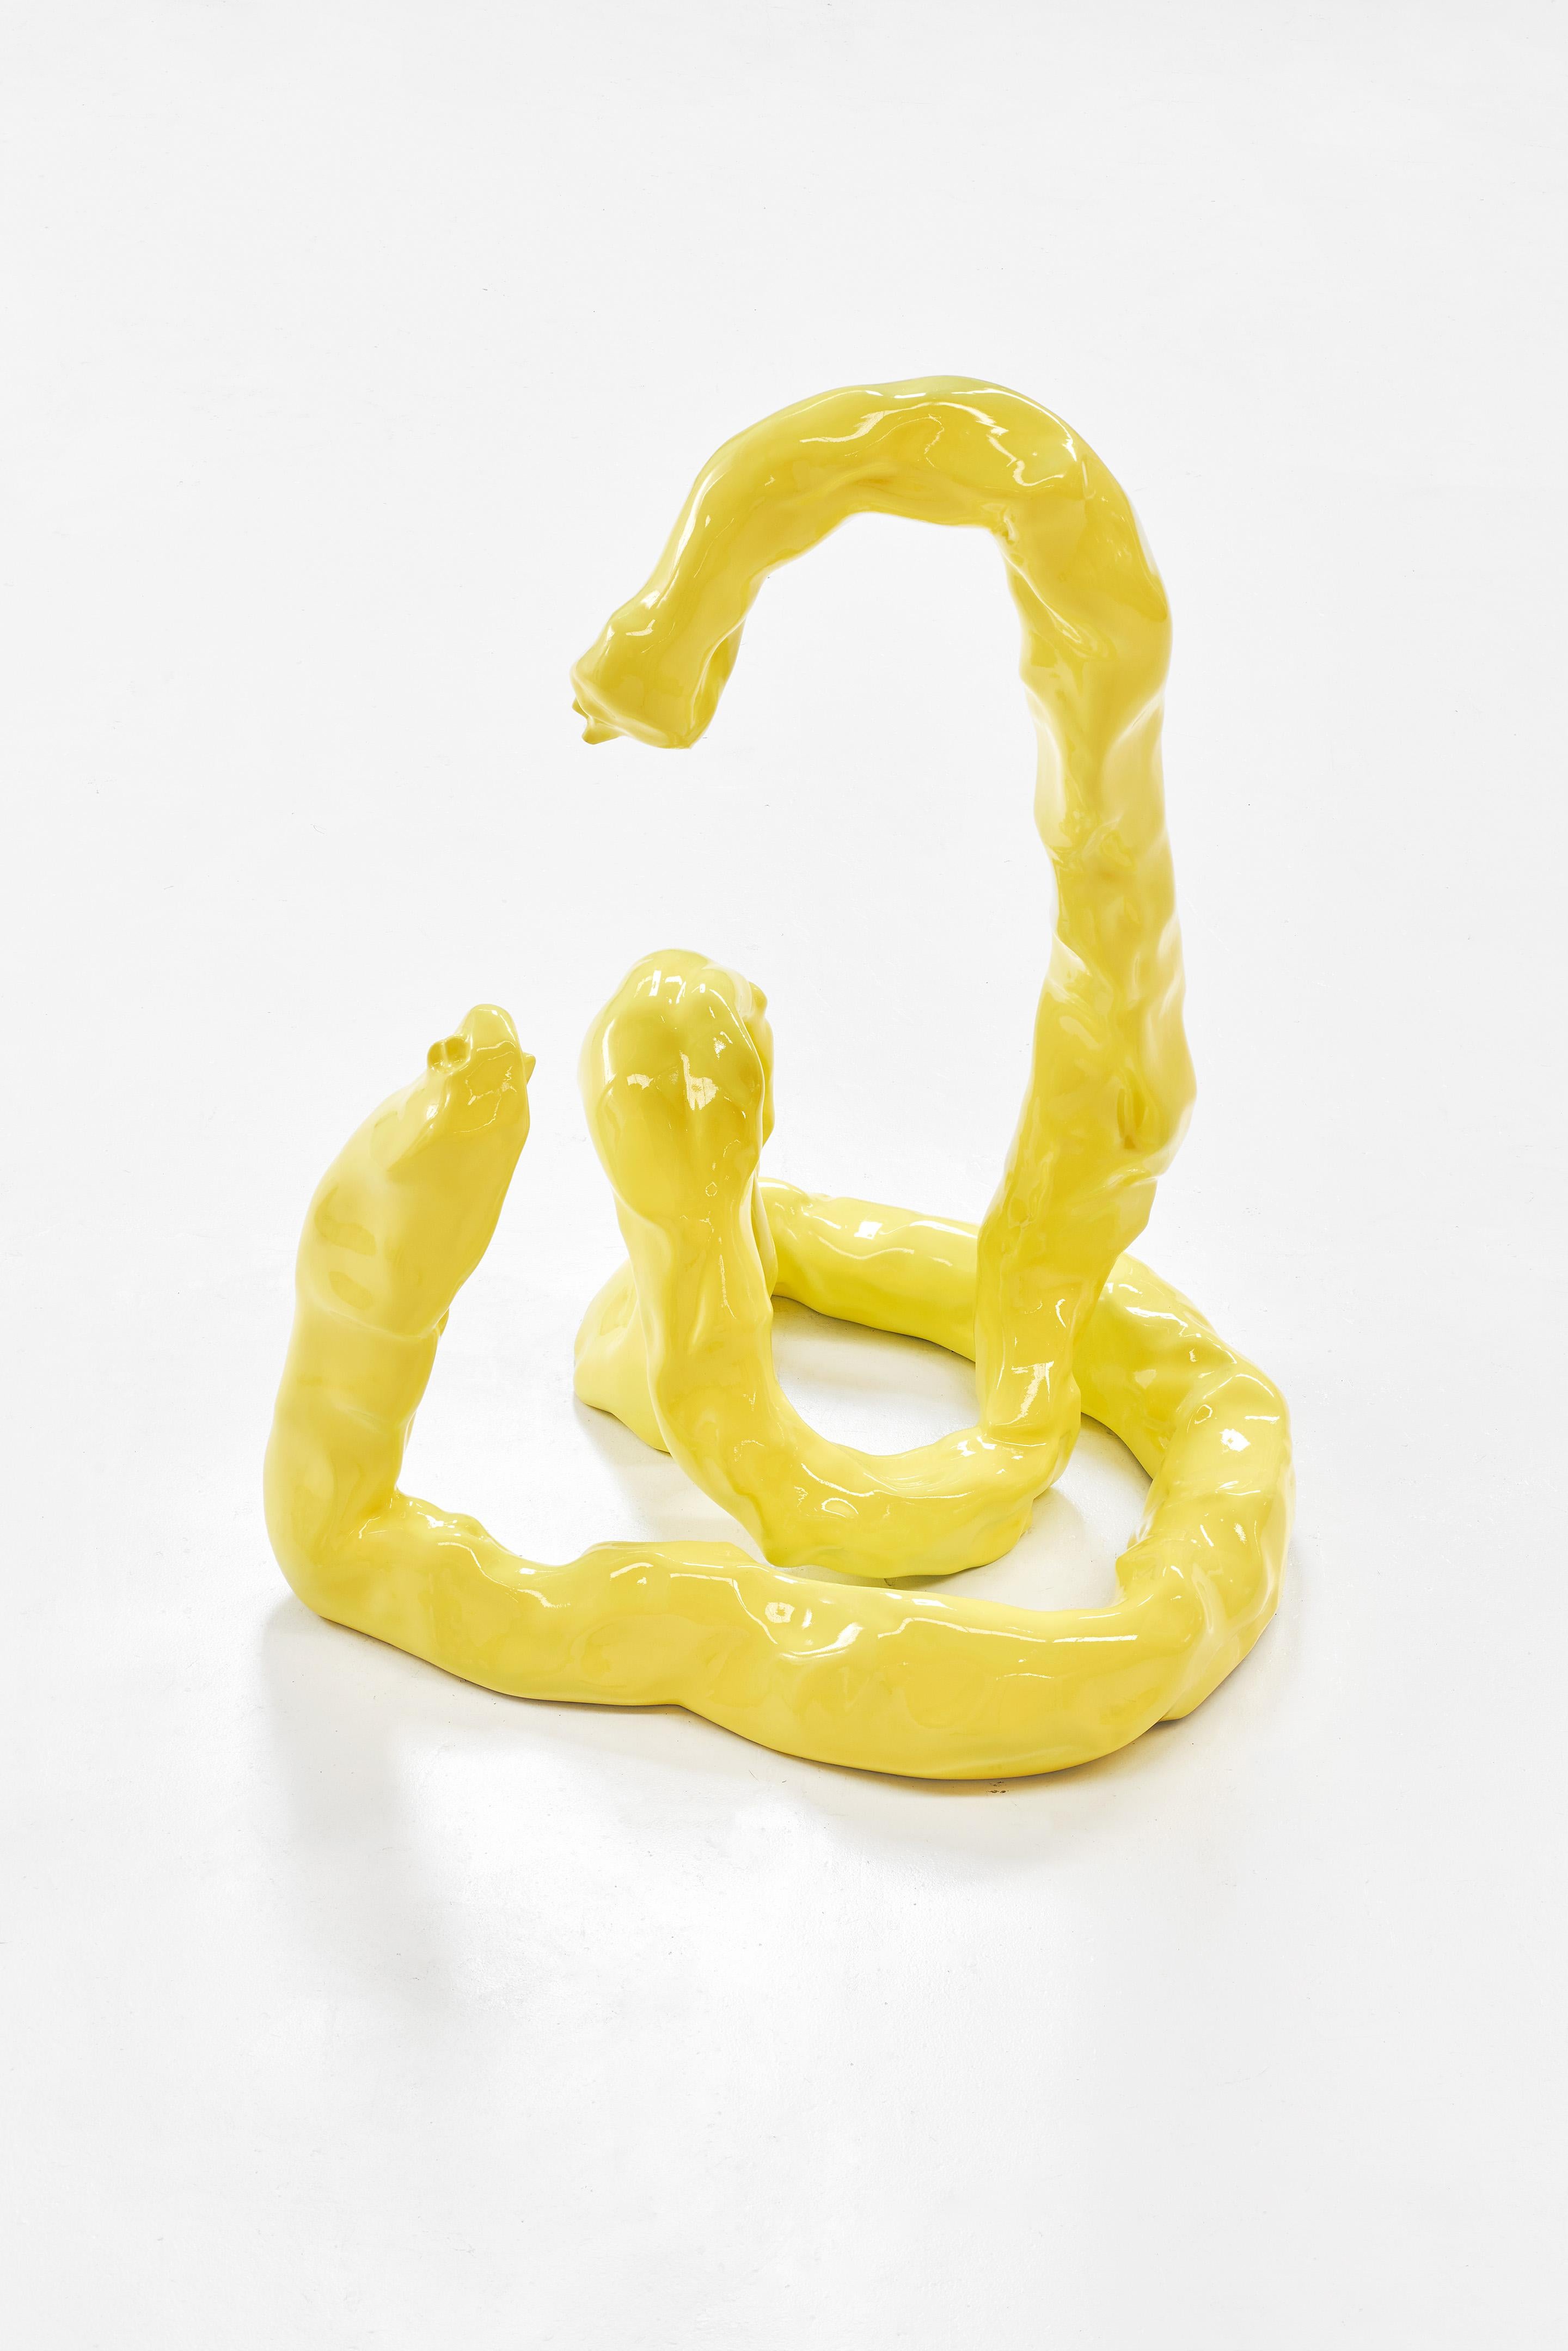 CNC Milled EVA Foam, covered in 4 layers of car paint in bright yellow. By Barcelona-based artist, architect and designer Guillermo Santoma.

Scan process. Reality as a material. Abstraction as a complex process of creating realities. Amorph in the